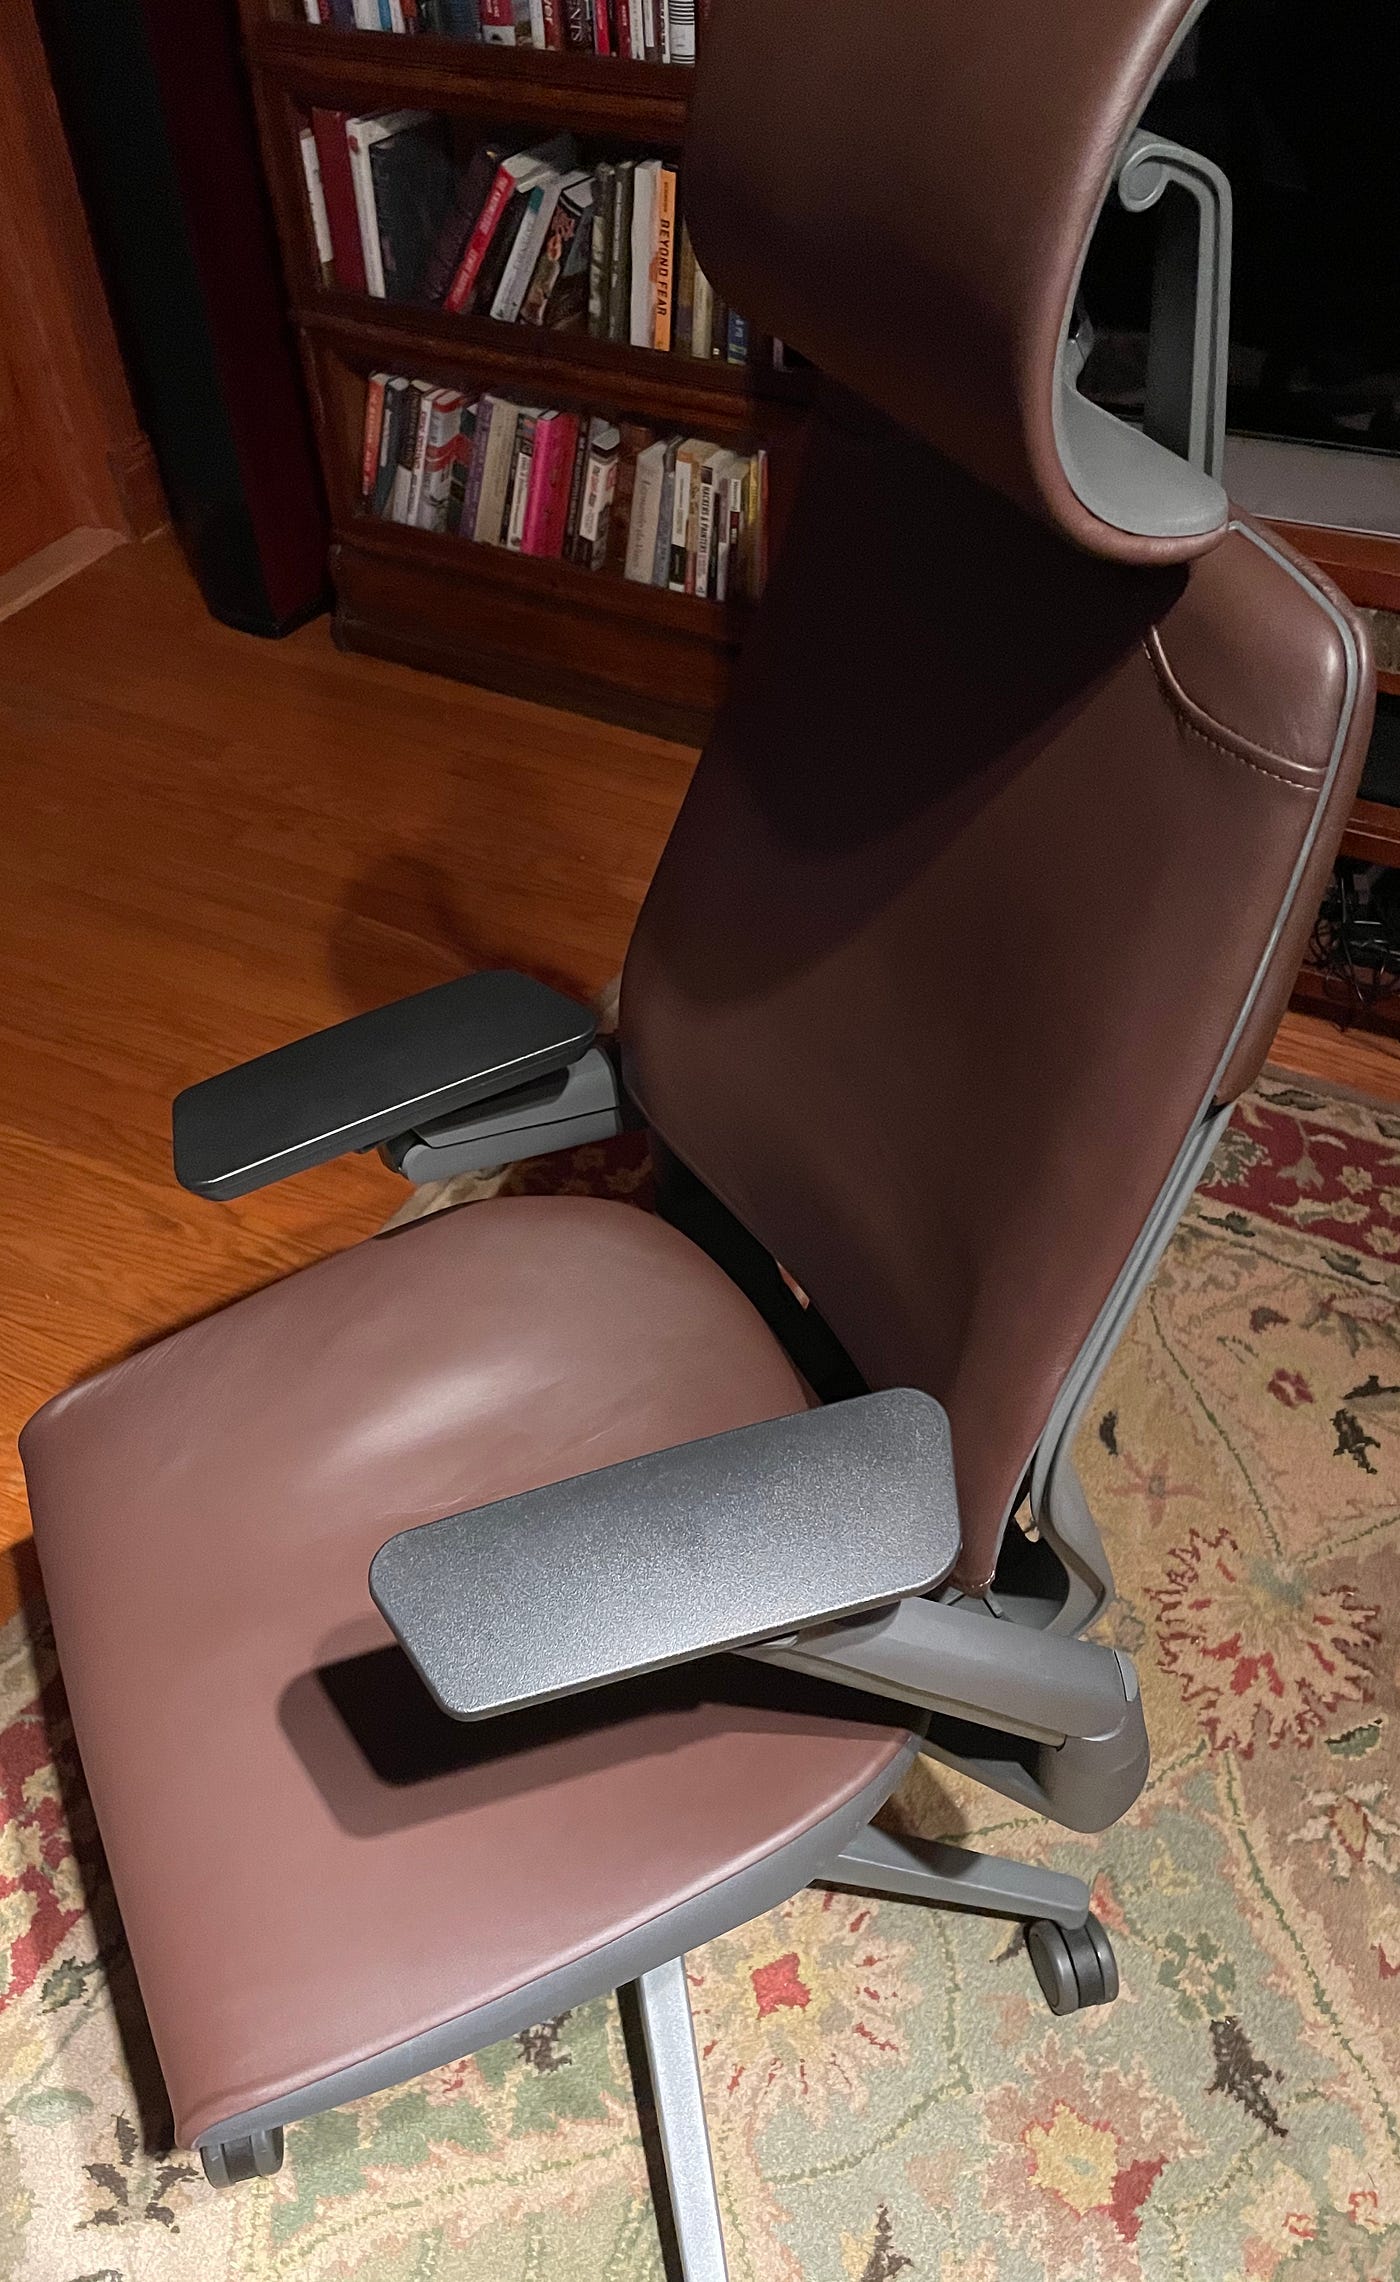 Steelcase Gesture Review: My Opinion 3 Years Later 